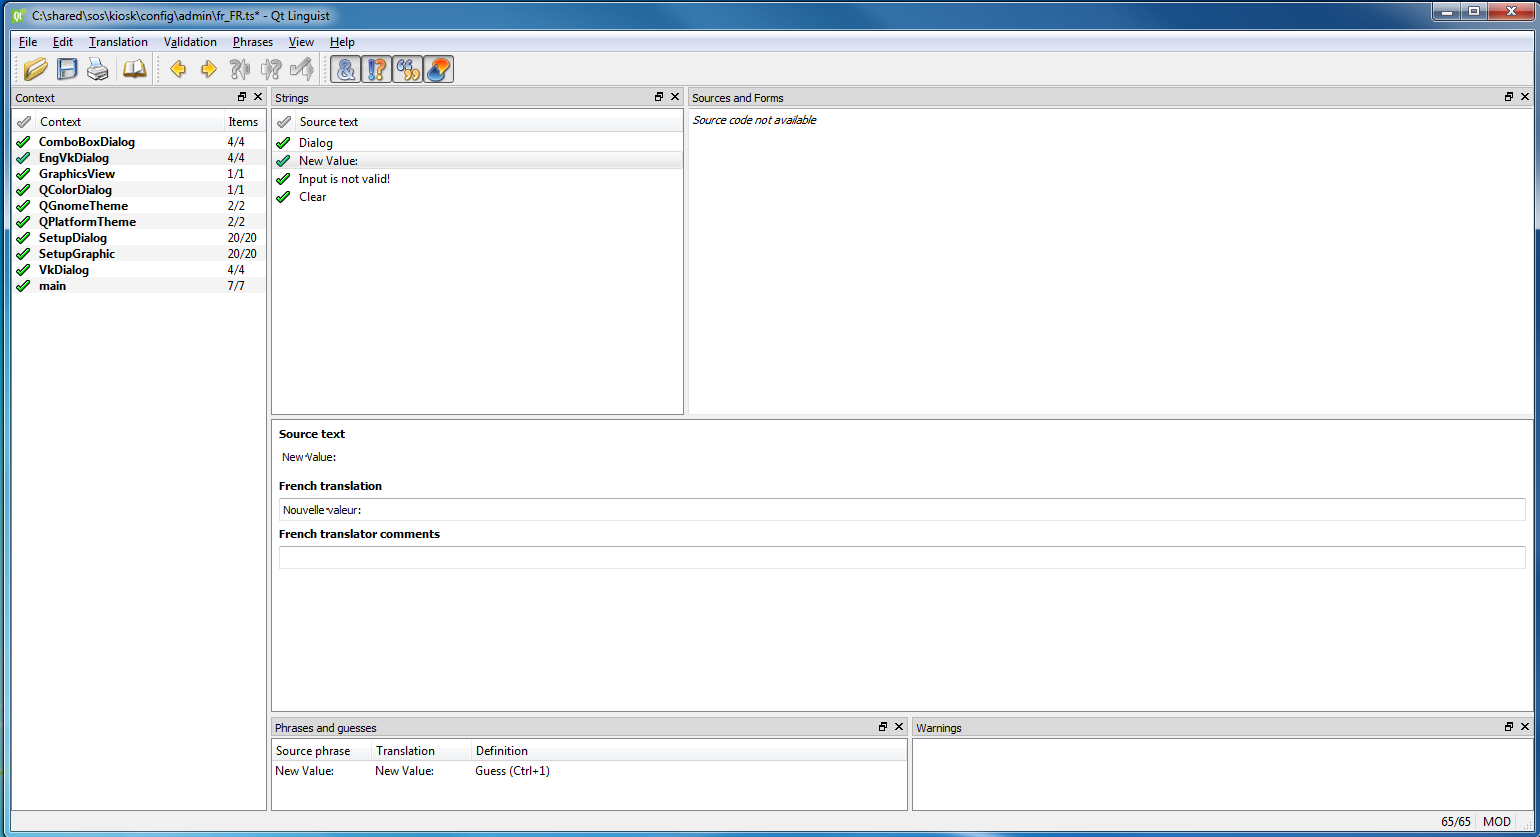 Screenshot of the Qt Linguist window showing context items, source text elements, and the translation pane